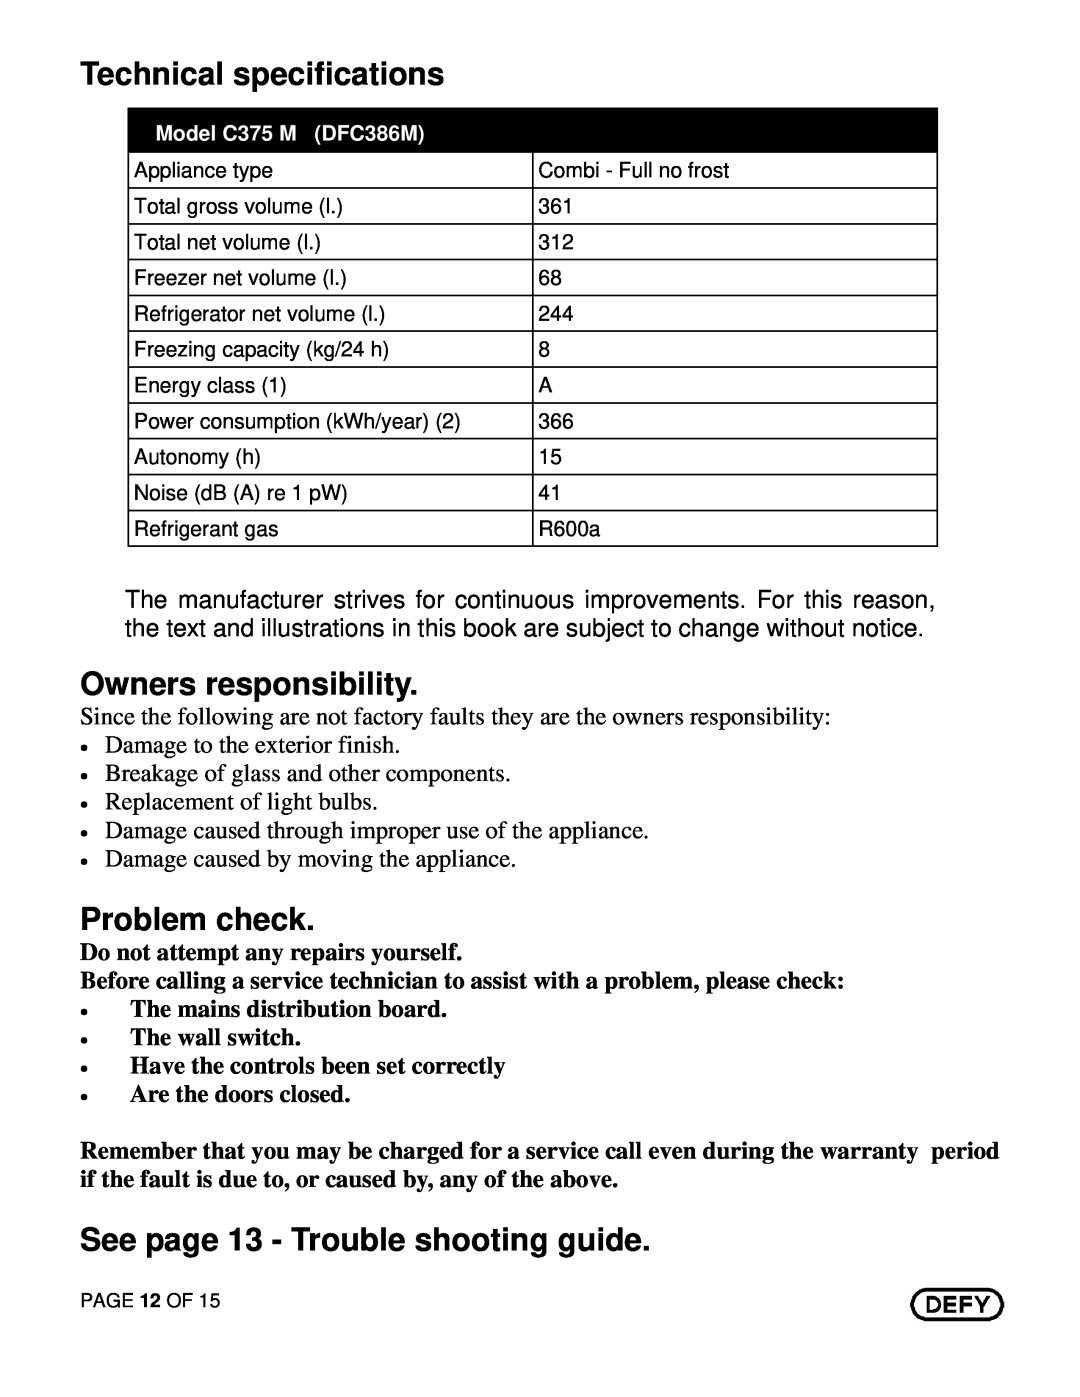 Defy Appliances C375 Technical specifications, Owners responsibility, Problem check, See page 13 - Trouble shooting guide 